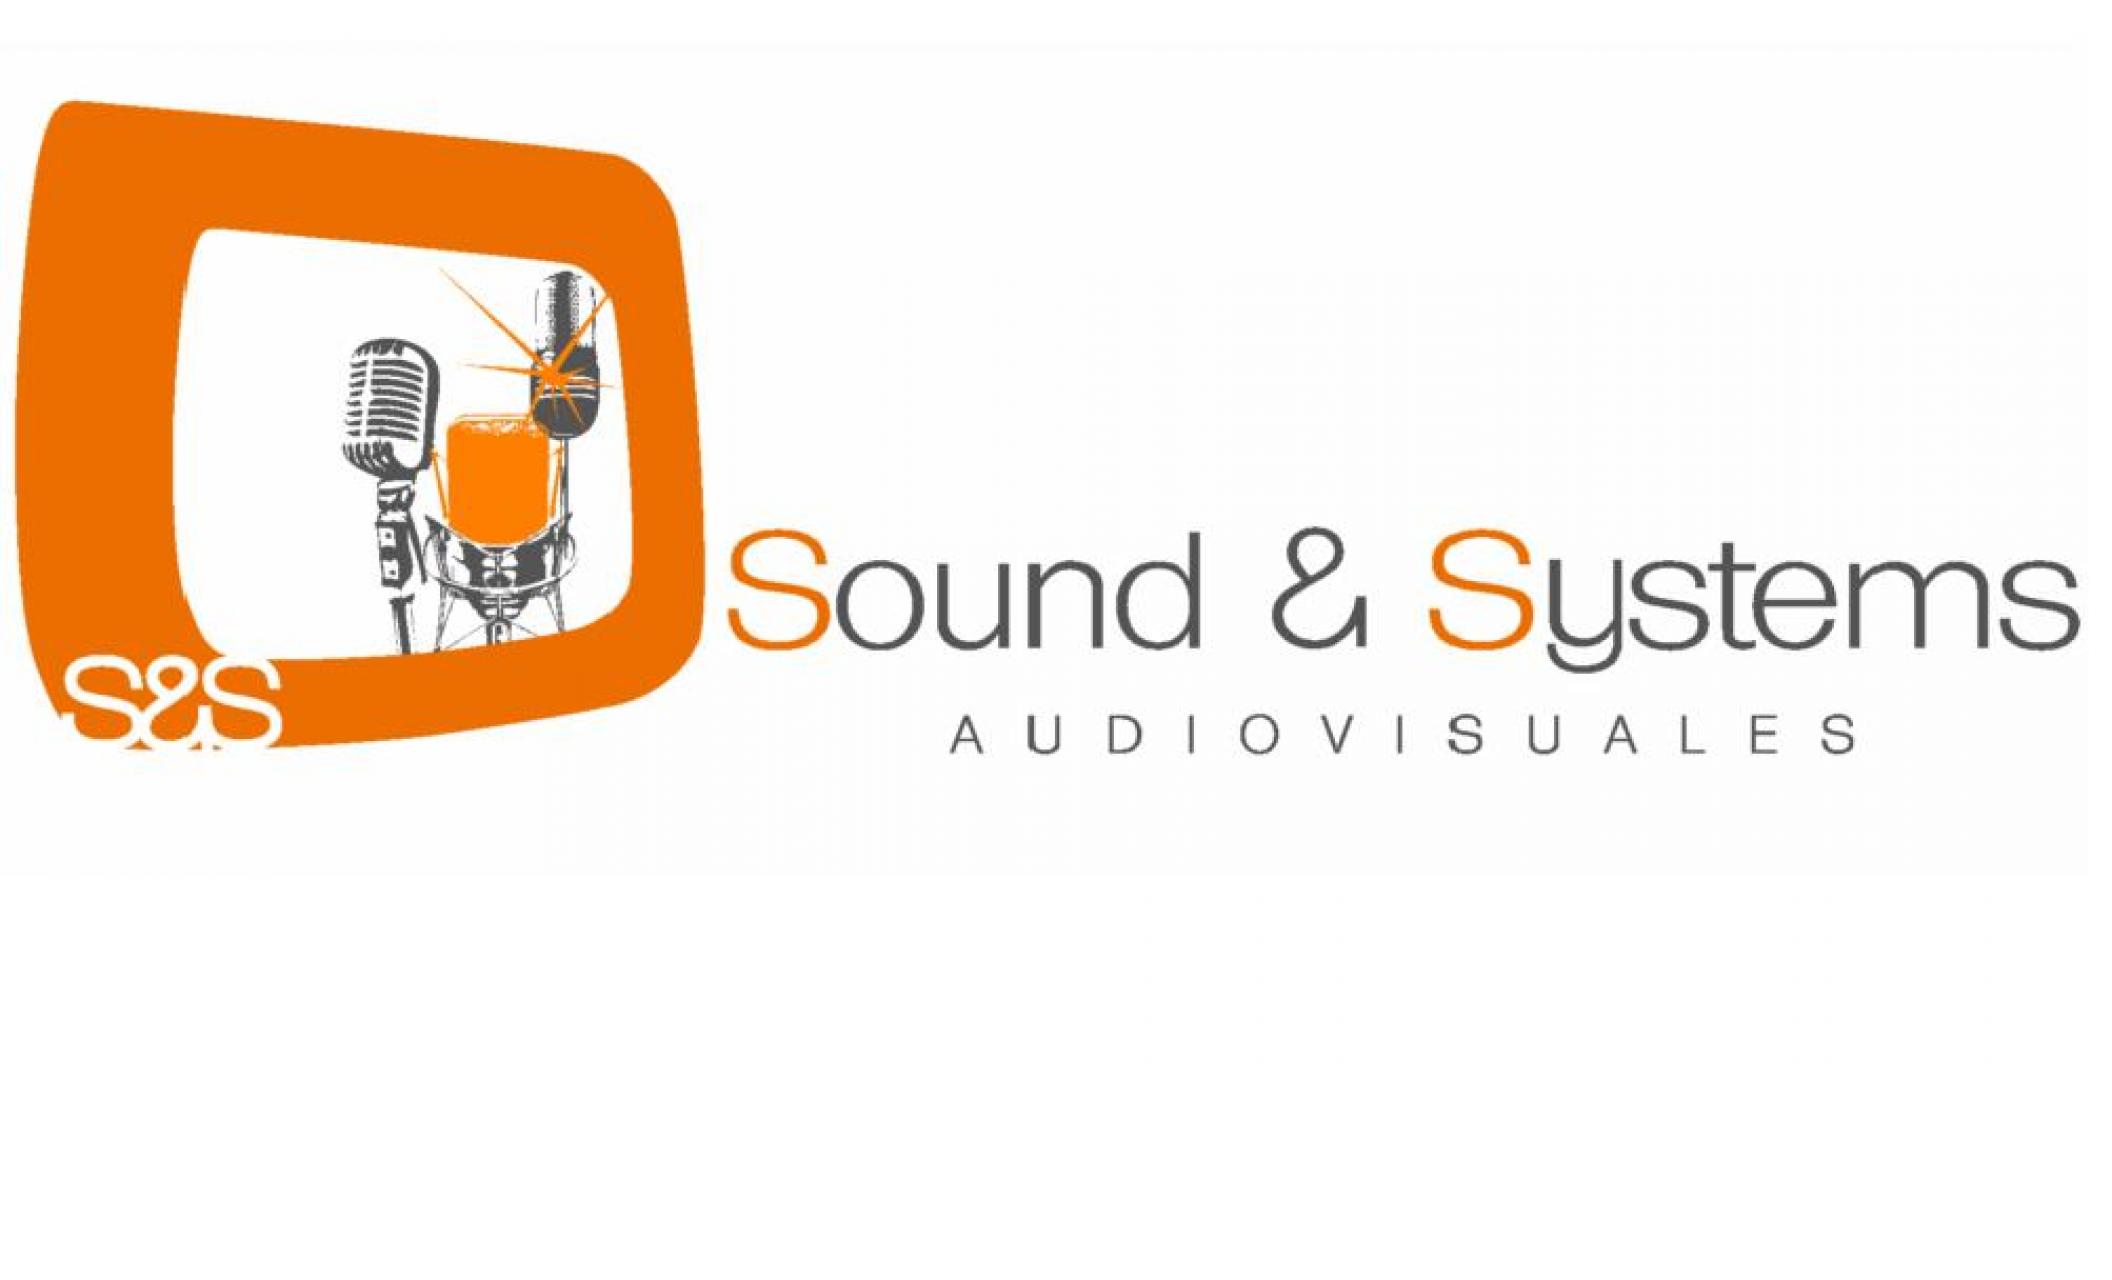 SOUND & SYSTEMS AUDIOVISUALES